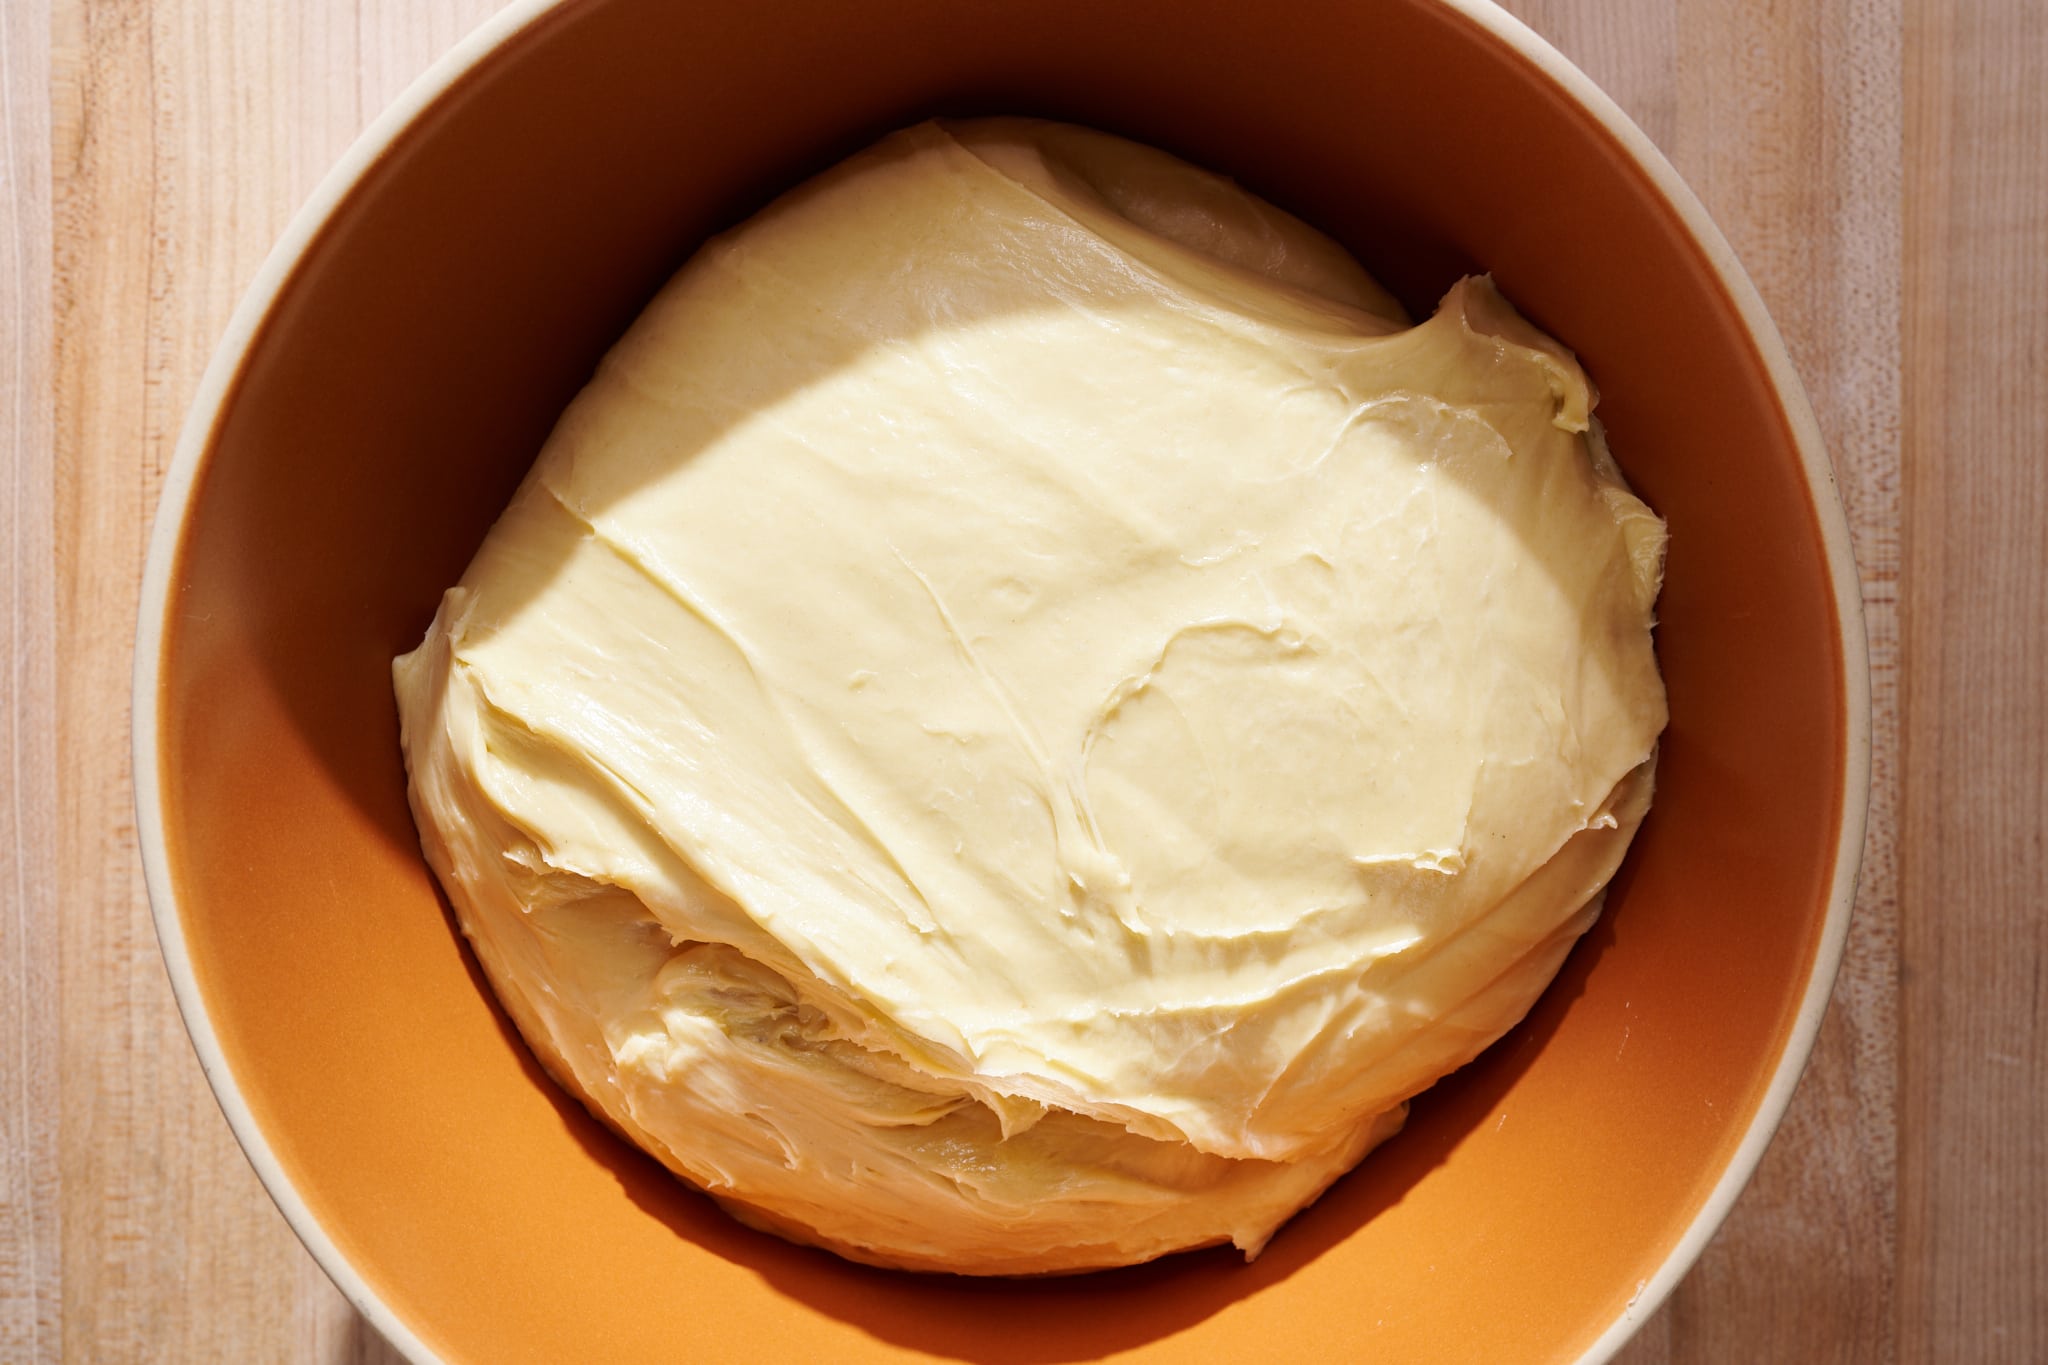 What Does Butter Do to Bread Dough?